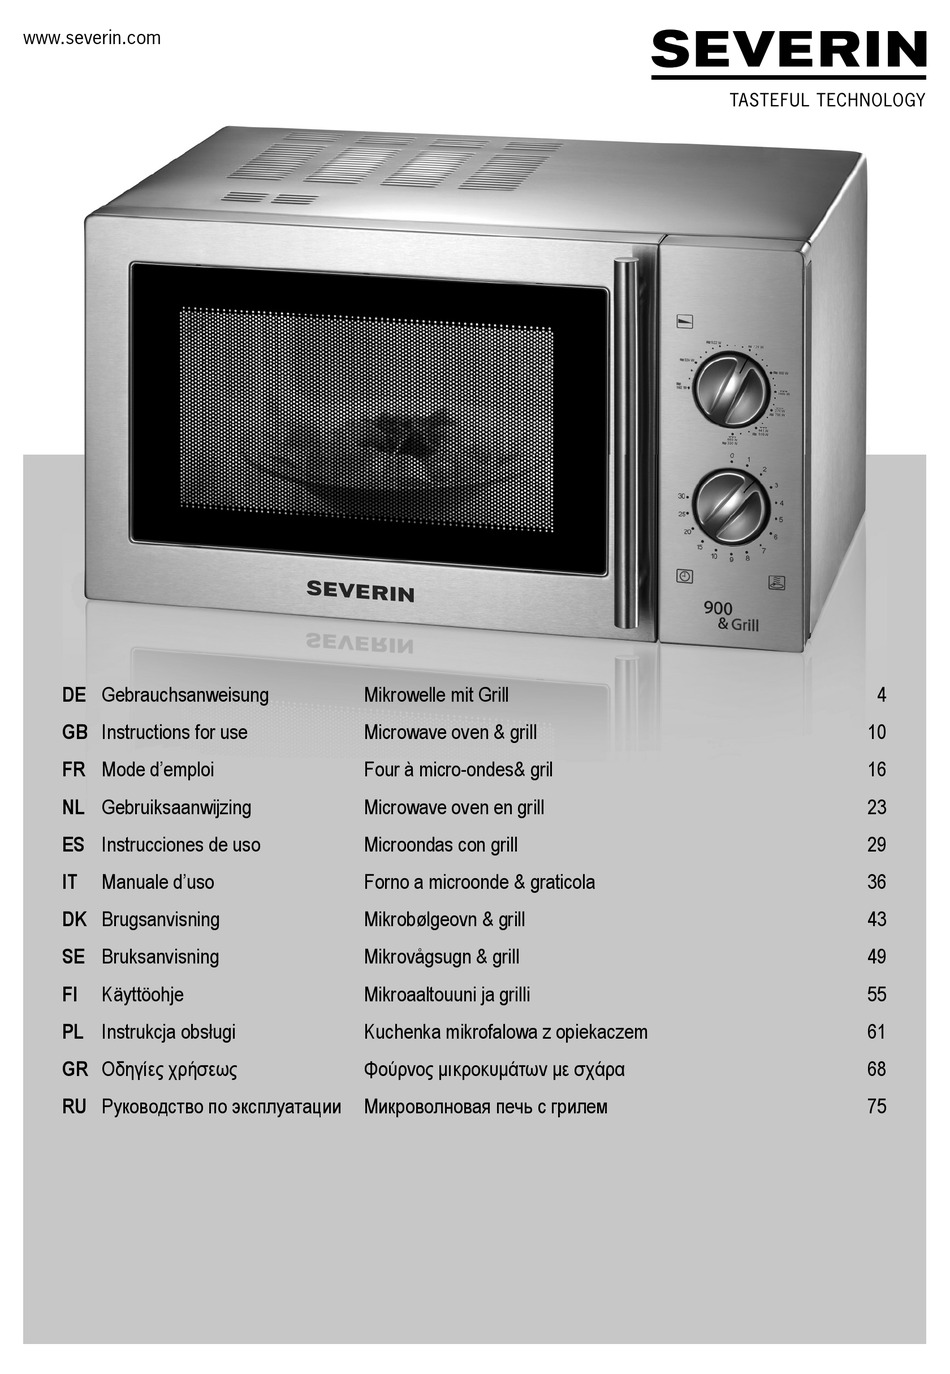 SEVERIN MW 7849 INSTRUCTIONS FOR USE MANUAL Pdf Download | ManualsLib | Mikrowellen